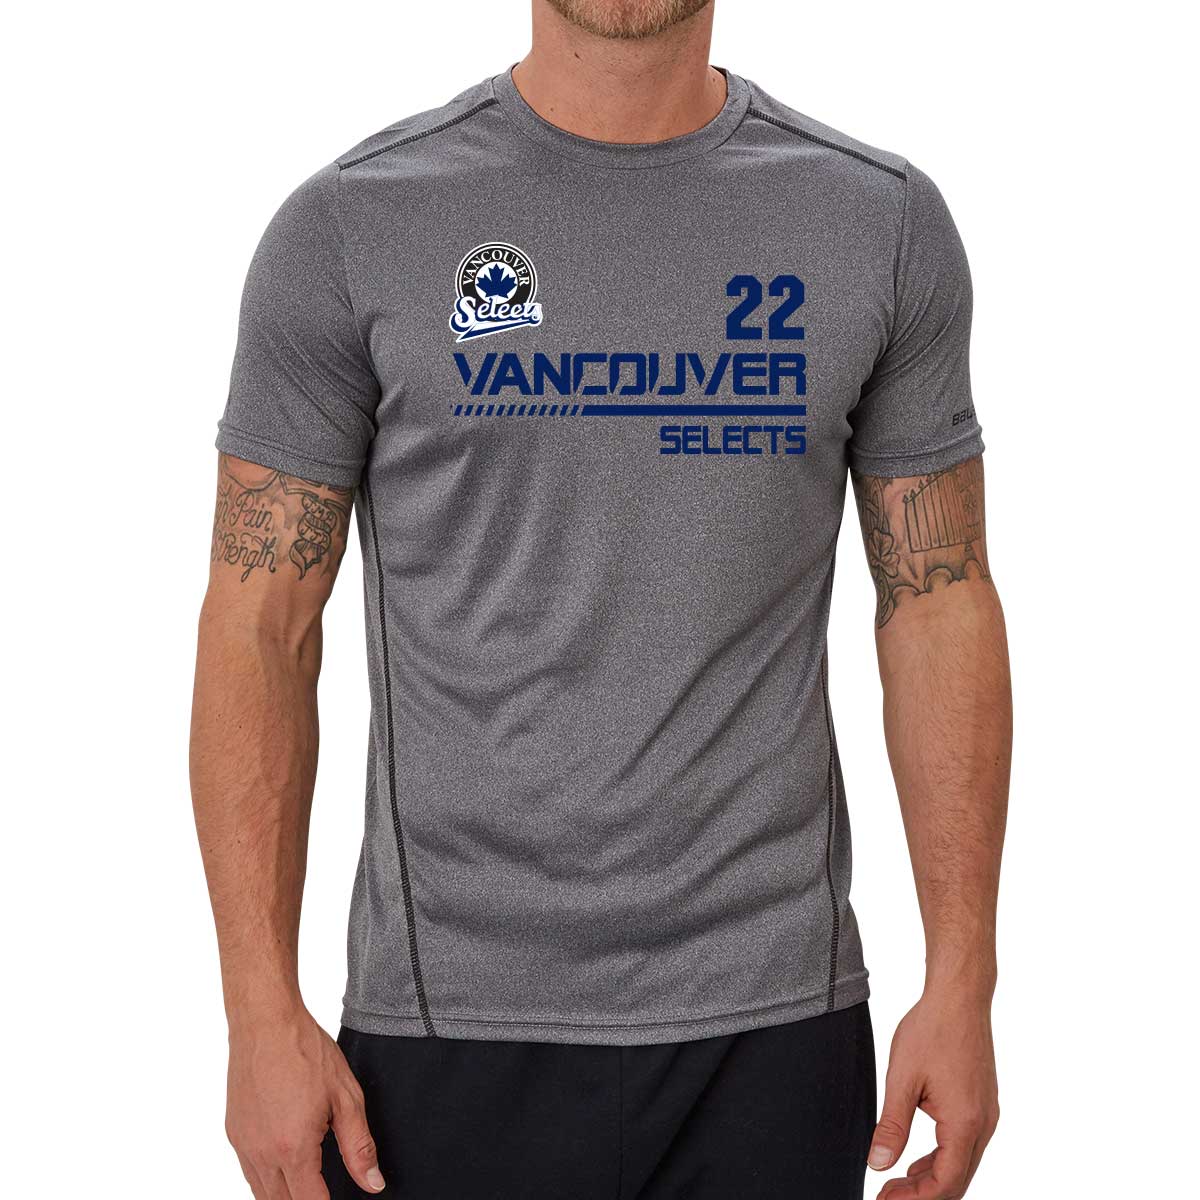 Vancouver Selects -- Youth Bauer Vapor Team Tech Tee